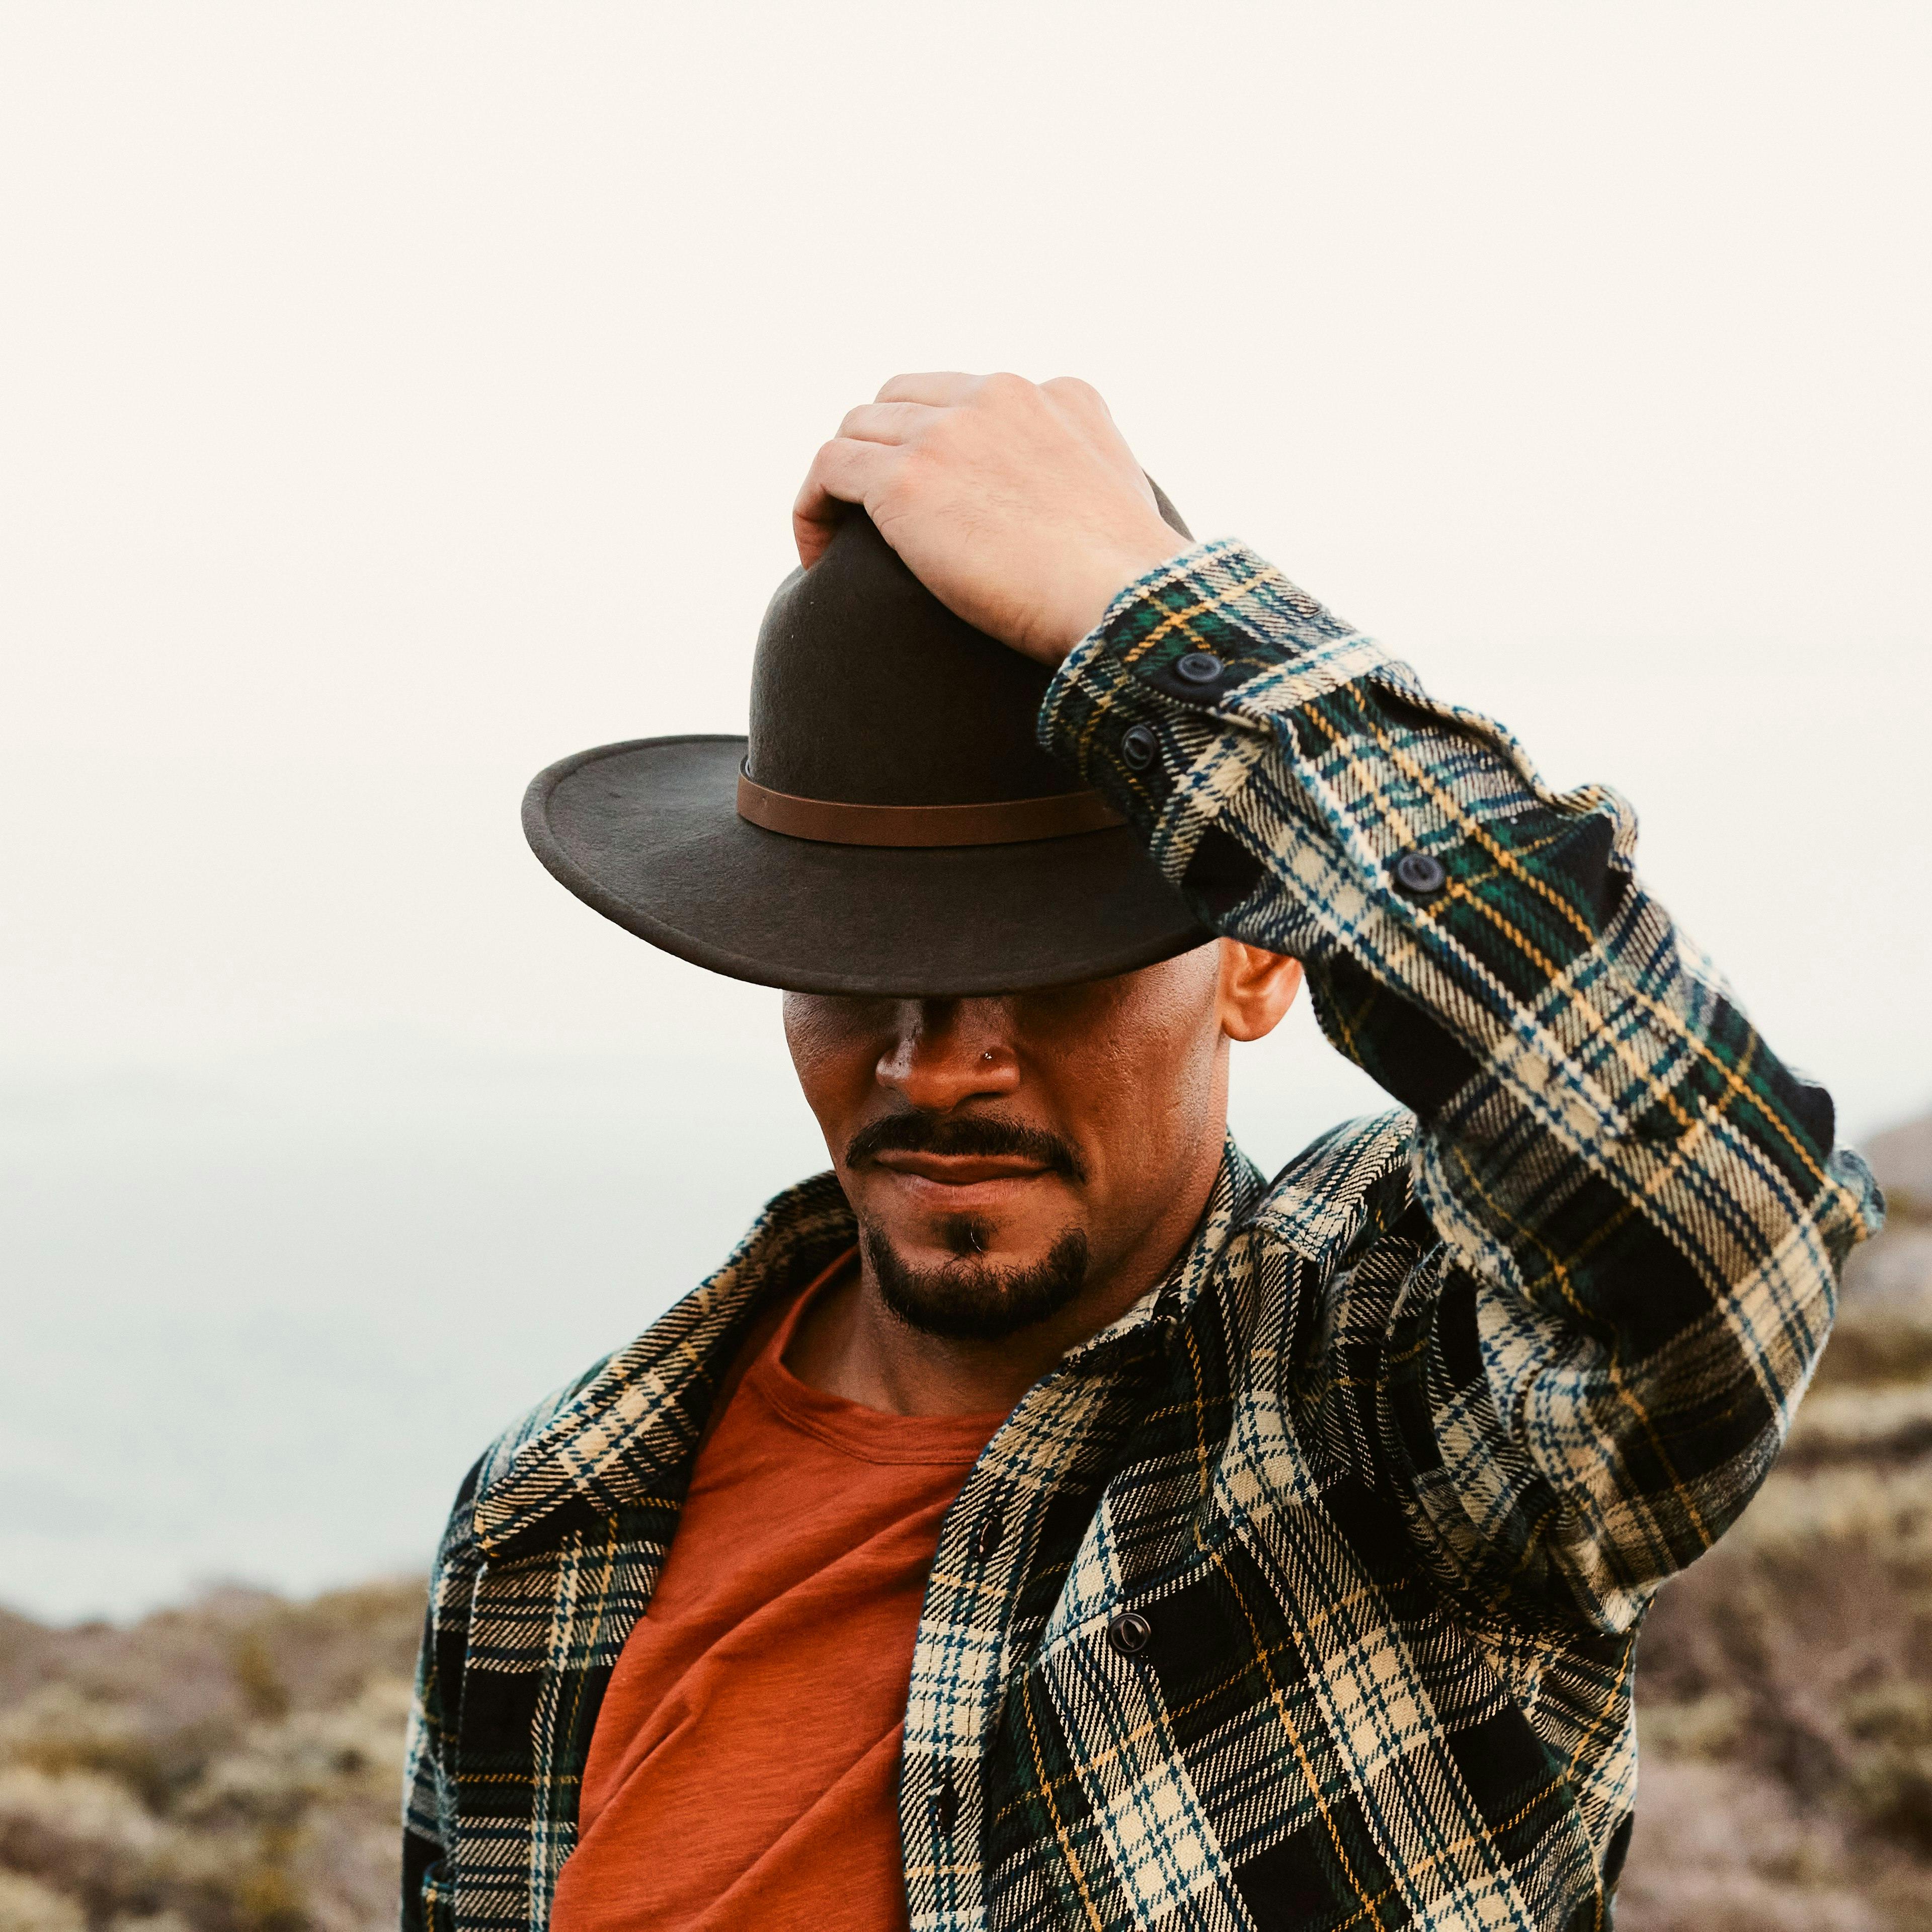 https://huckberry.imgix.net/spree/products/674647/original/73889_Stetson_The_Route_66_Sage_lifestyle_04_PDP_WEB.jpg?auto=format%2C%20compress&crop=top&fit=fill&cs=tinysrgb&ar=4%3A5&fill=solid&fill-color=FFFFFF&ixlib=react-9.8.1